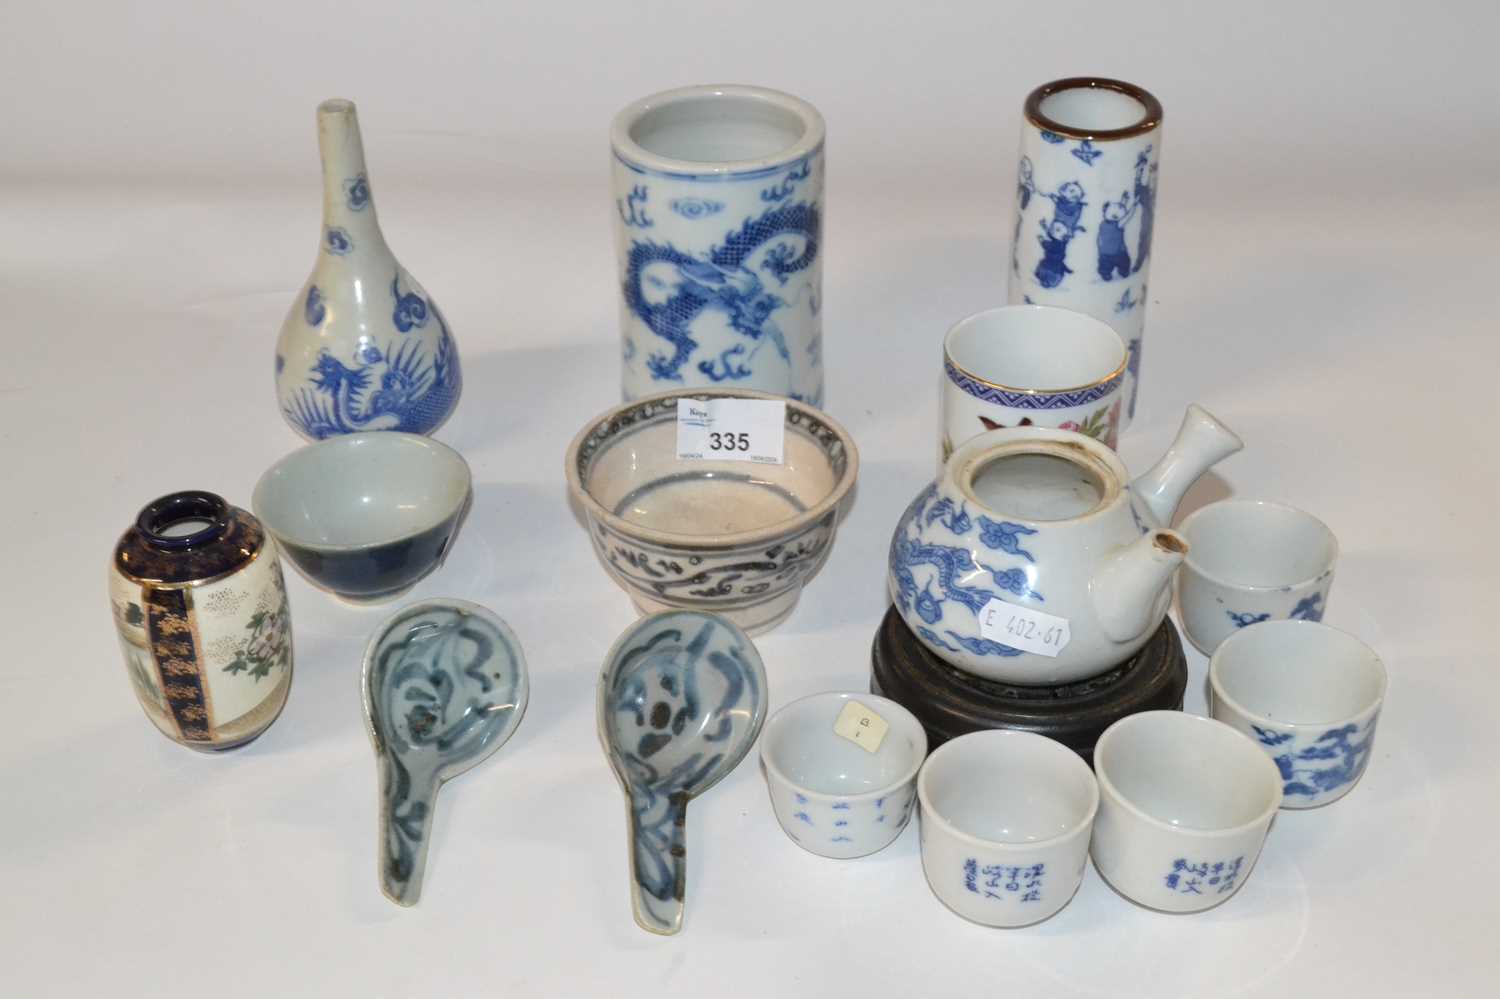 A group of Chinese porcelain wares, late 19th or early 20th Century, all with typical blue and white